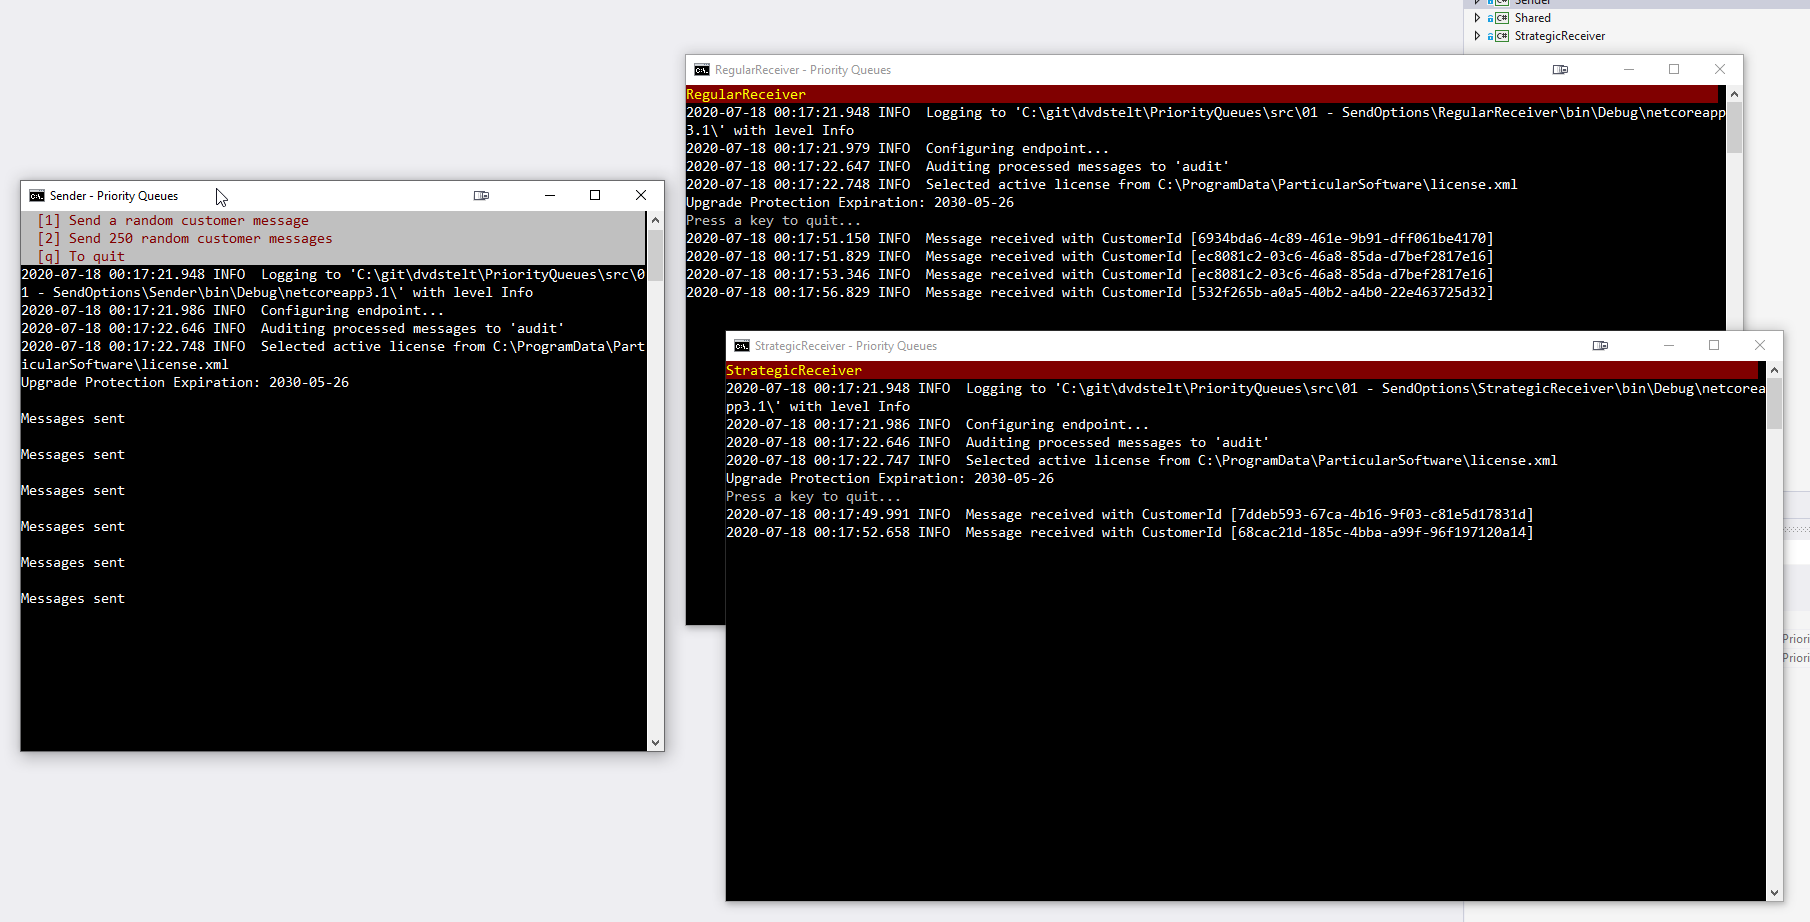 The 3 console windows showing logging output for each.